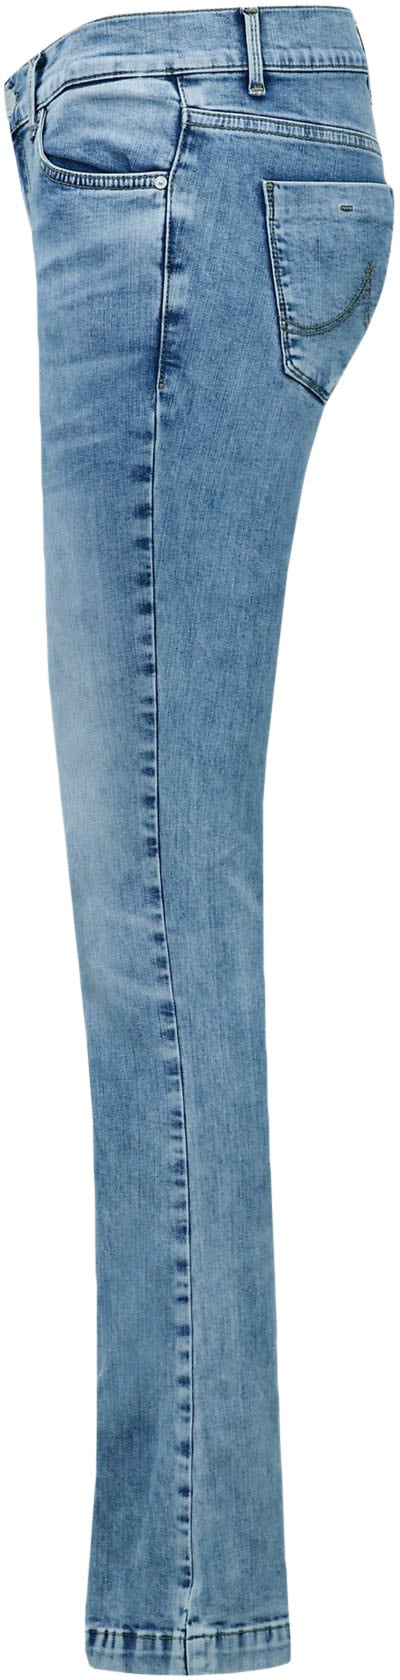 LTB Bootcut-Jeans »Fallon«, in 5-Pocket-Form bestellen bei OTTO | Stretchjeans